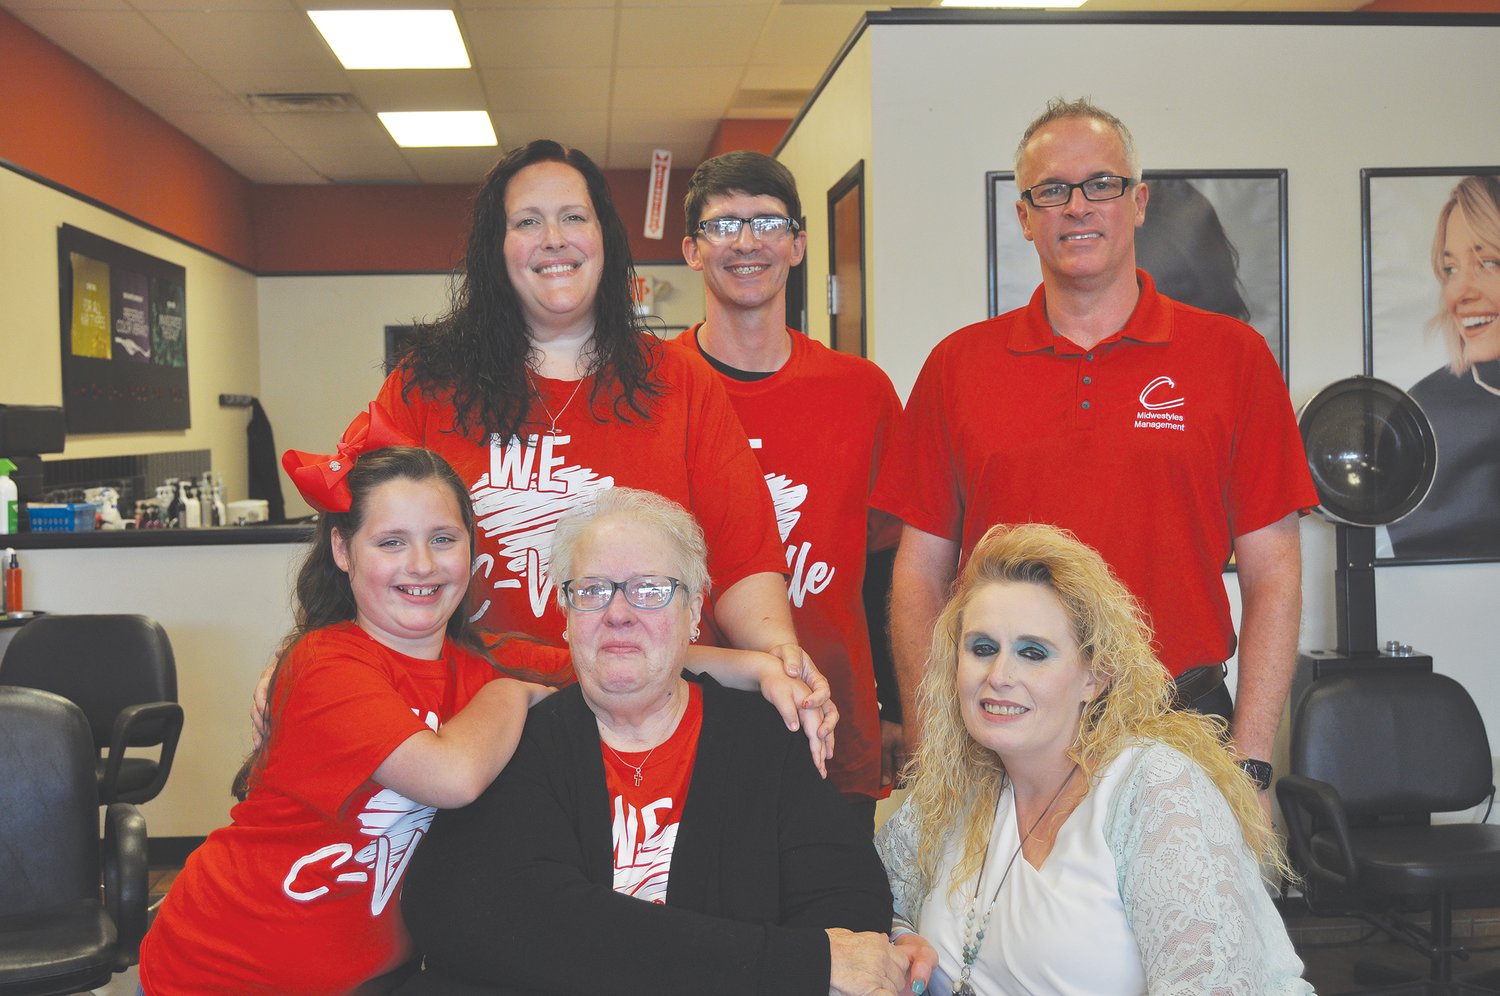 Debra Raye, center of front row, poses with members of her family at Cost Cutters. A fundraiser for the local cancer patient is planned for 1-6 p.m. Sunday at the salon. Also pictured is stylist Debbie Wright (in white) and Cost Cutters manager Fred Punke (back row, right).